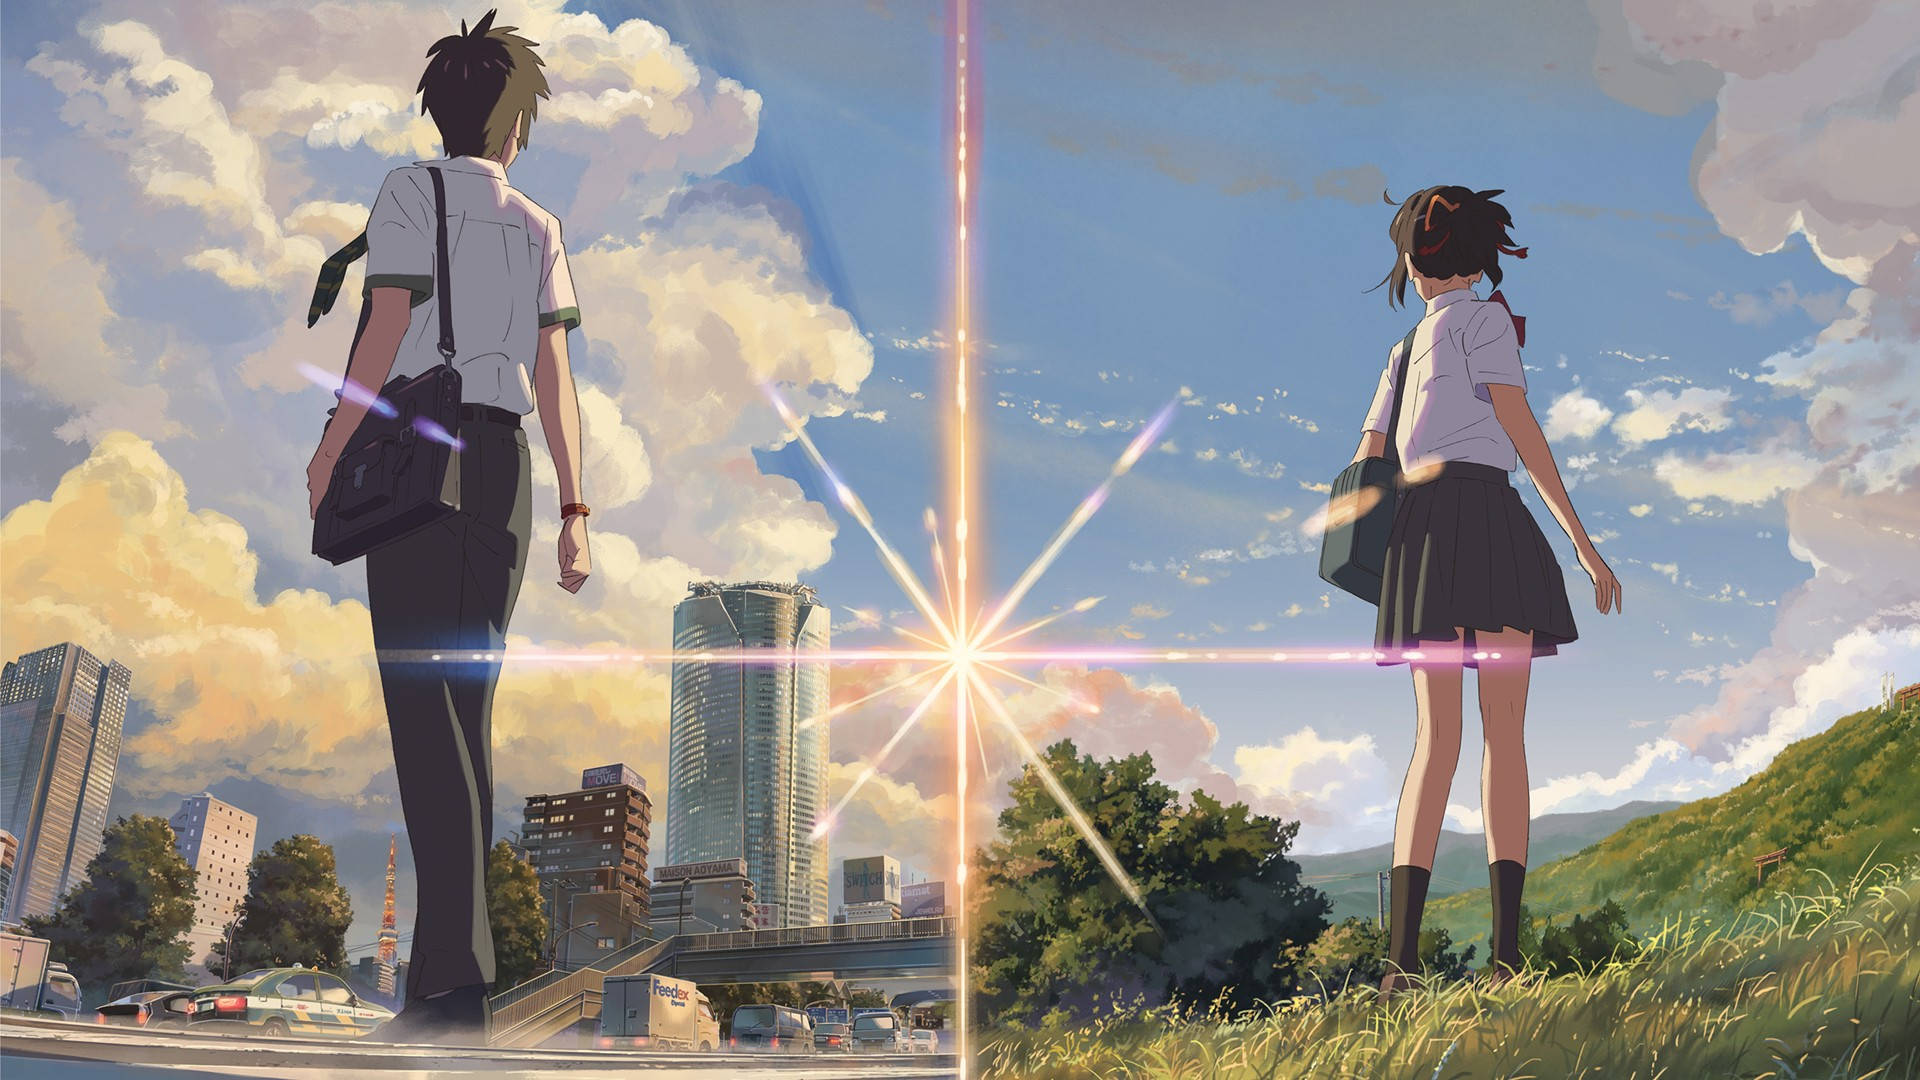 Two Worlds Your Name Anime 2016 Background